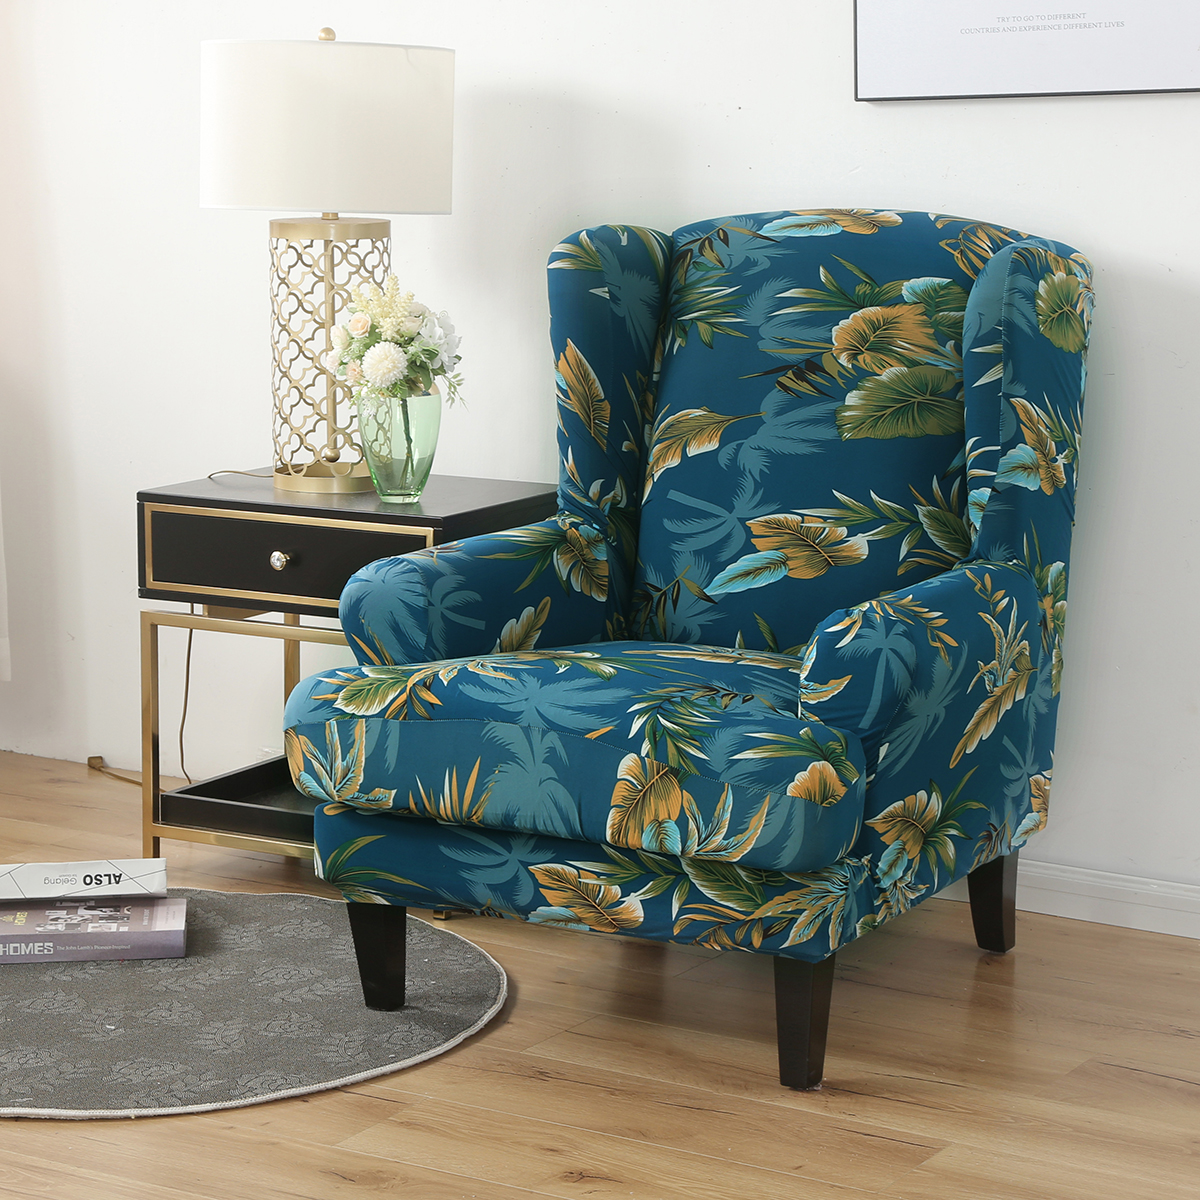 Details about   Modern Wing Back Slipcover Stretch Armchair Chair Printed Cover Home Room Decor 